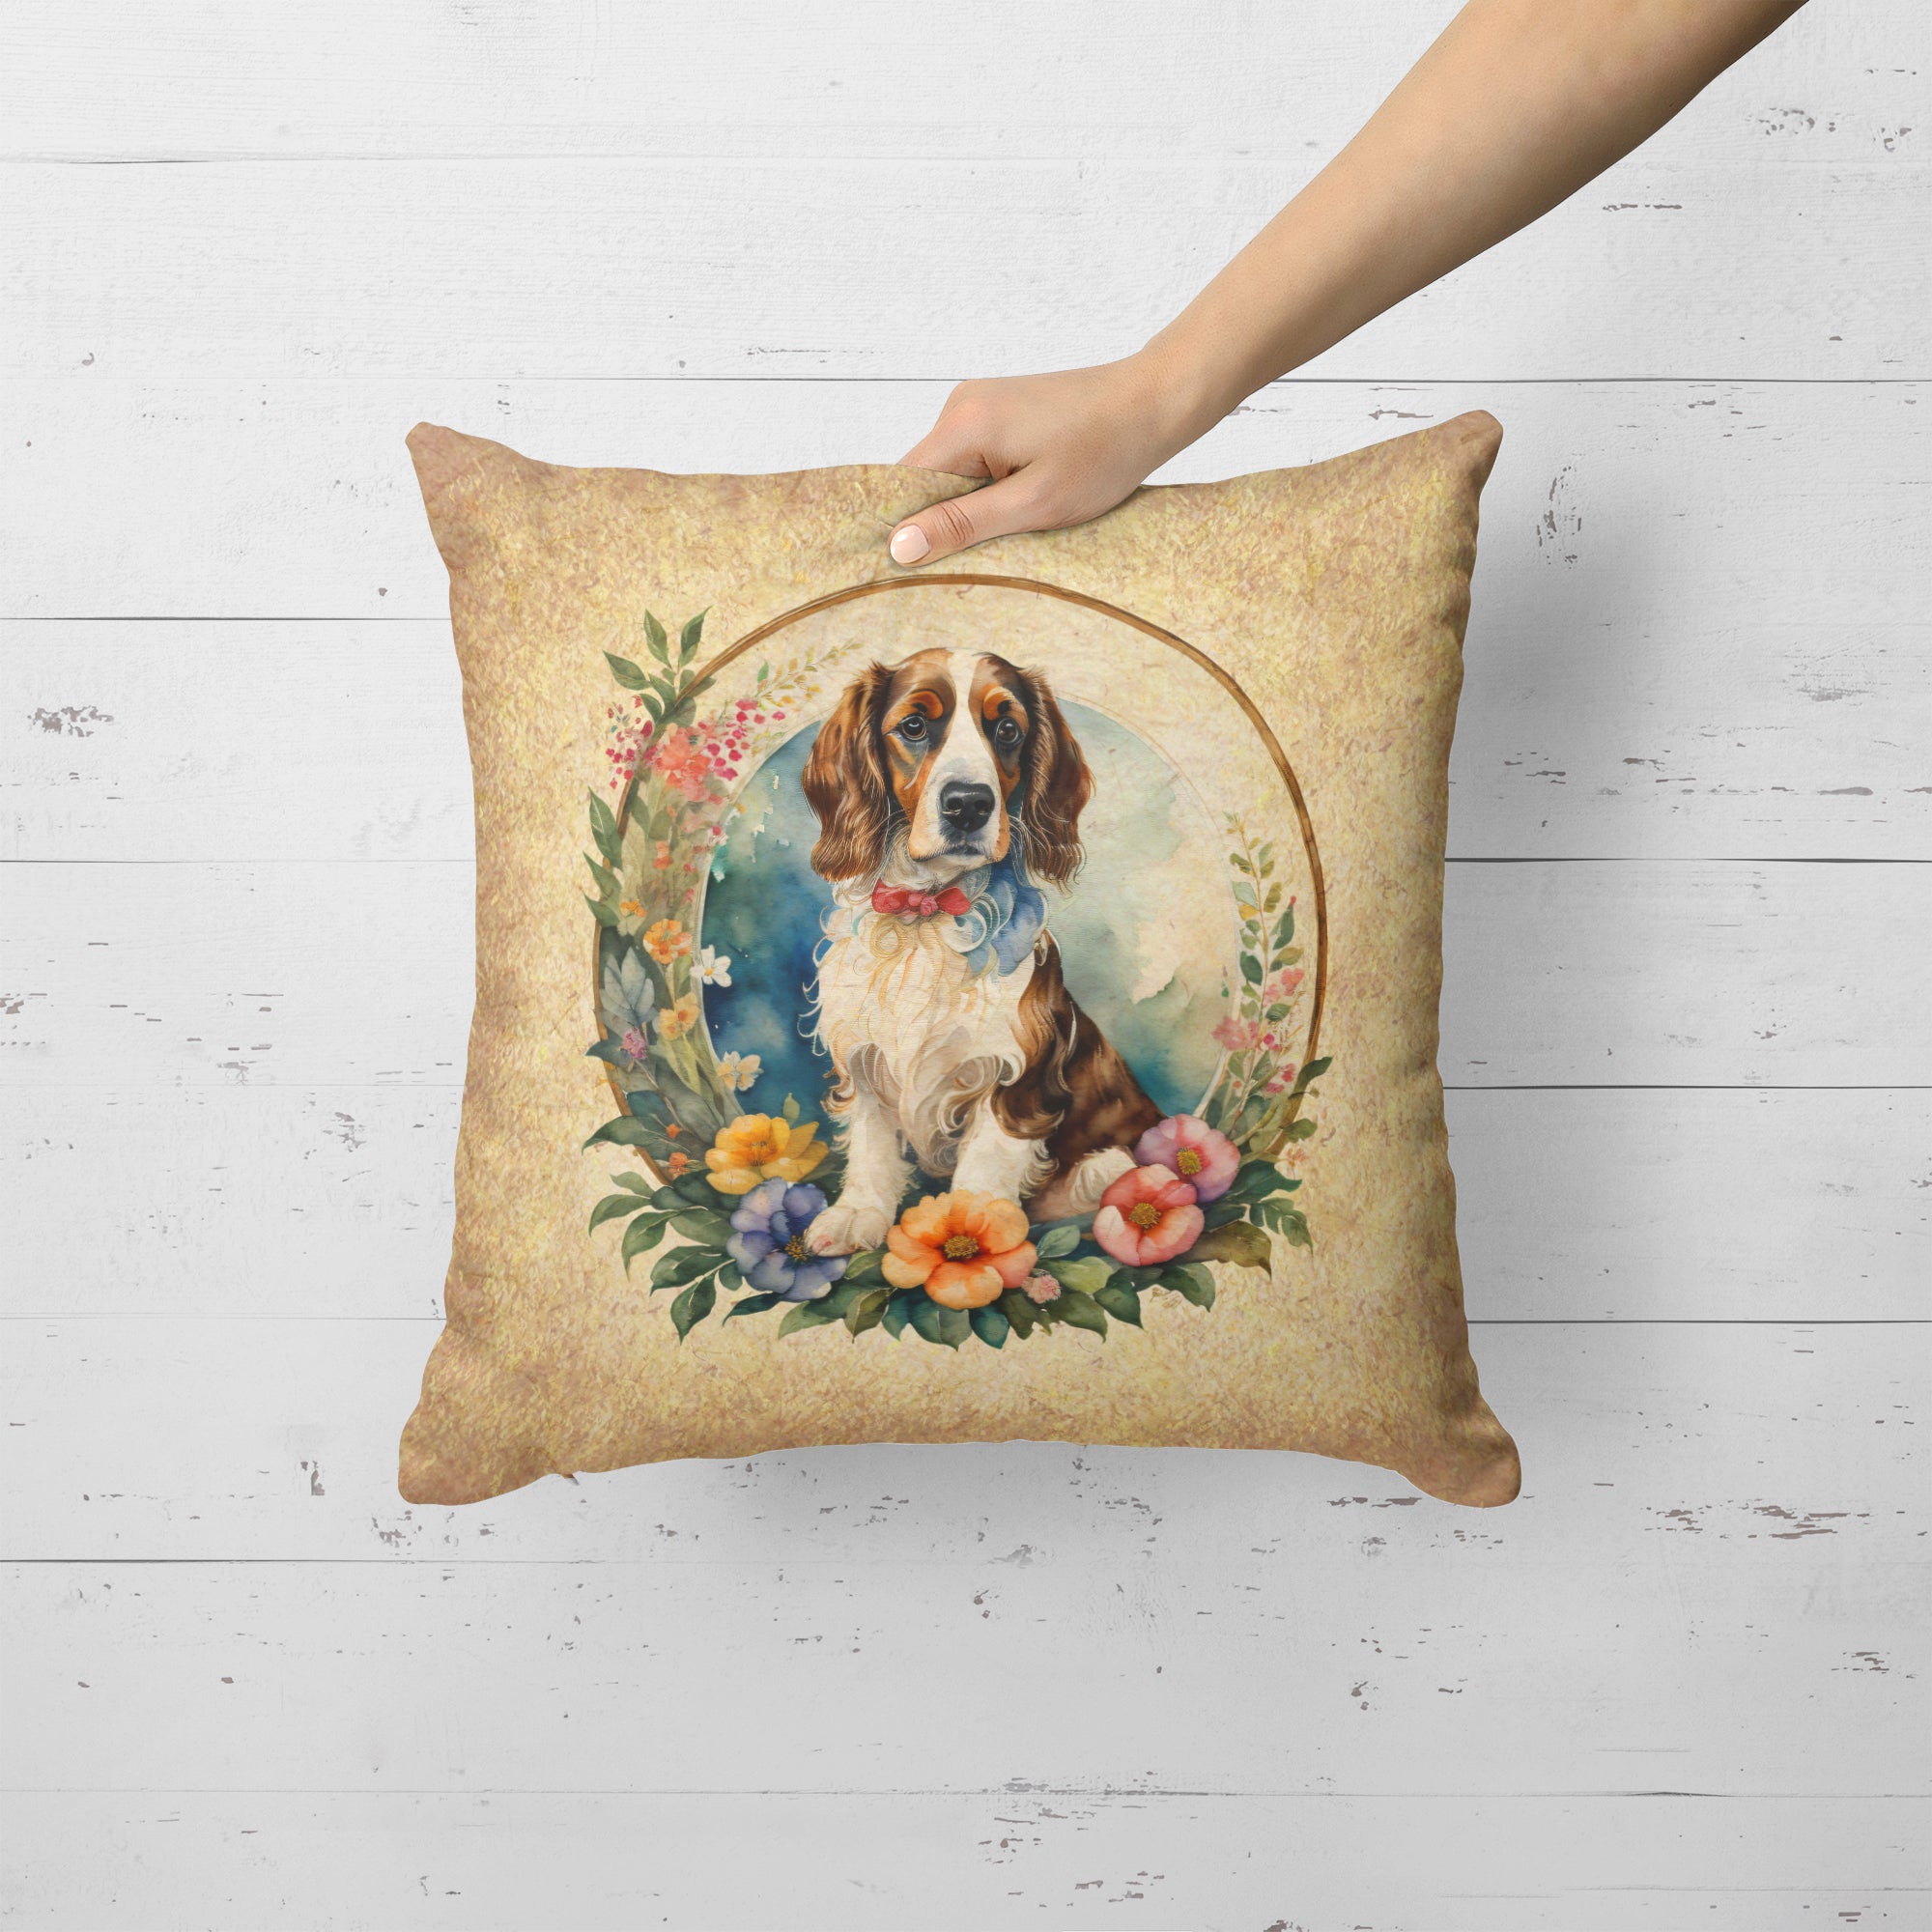 Welsh Springer Spaniel and Flowers Fabric Decorative Pillow